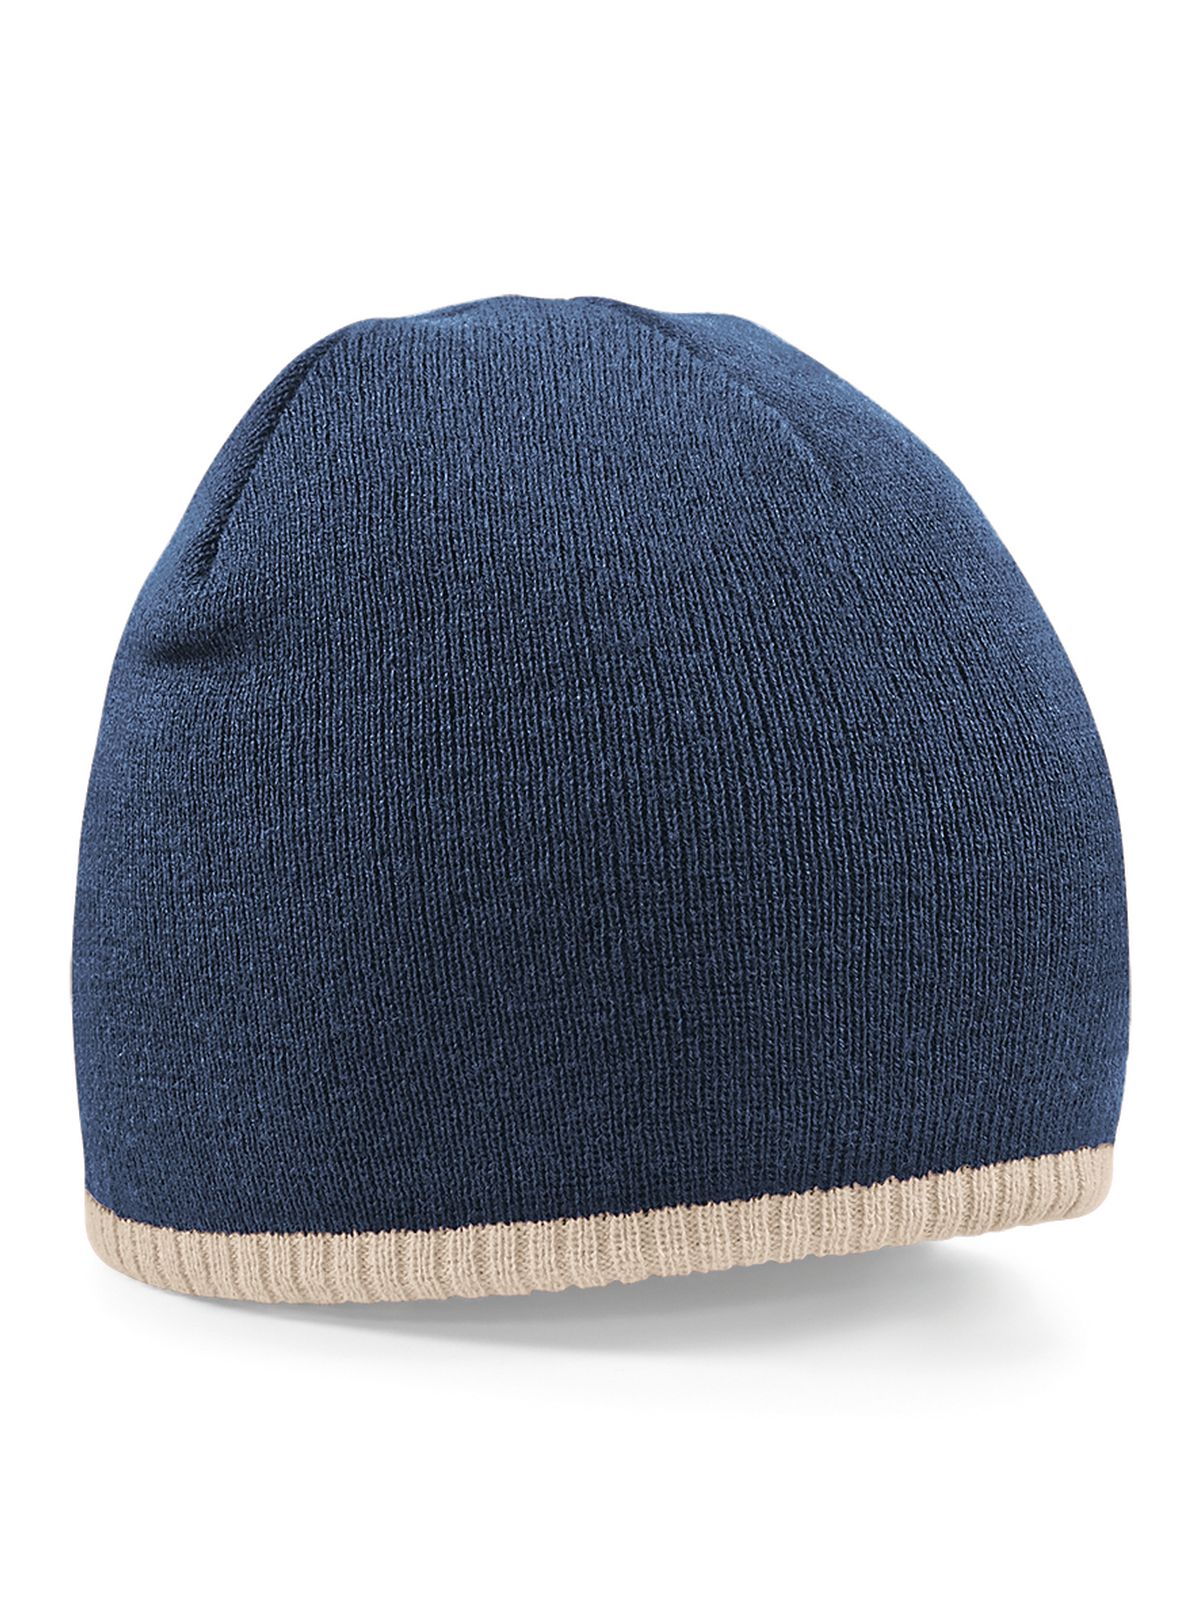 two-tone-pull-on-beanie-french-navy-stone.webp